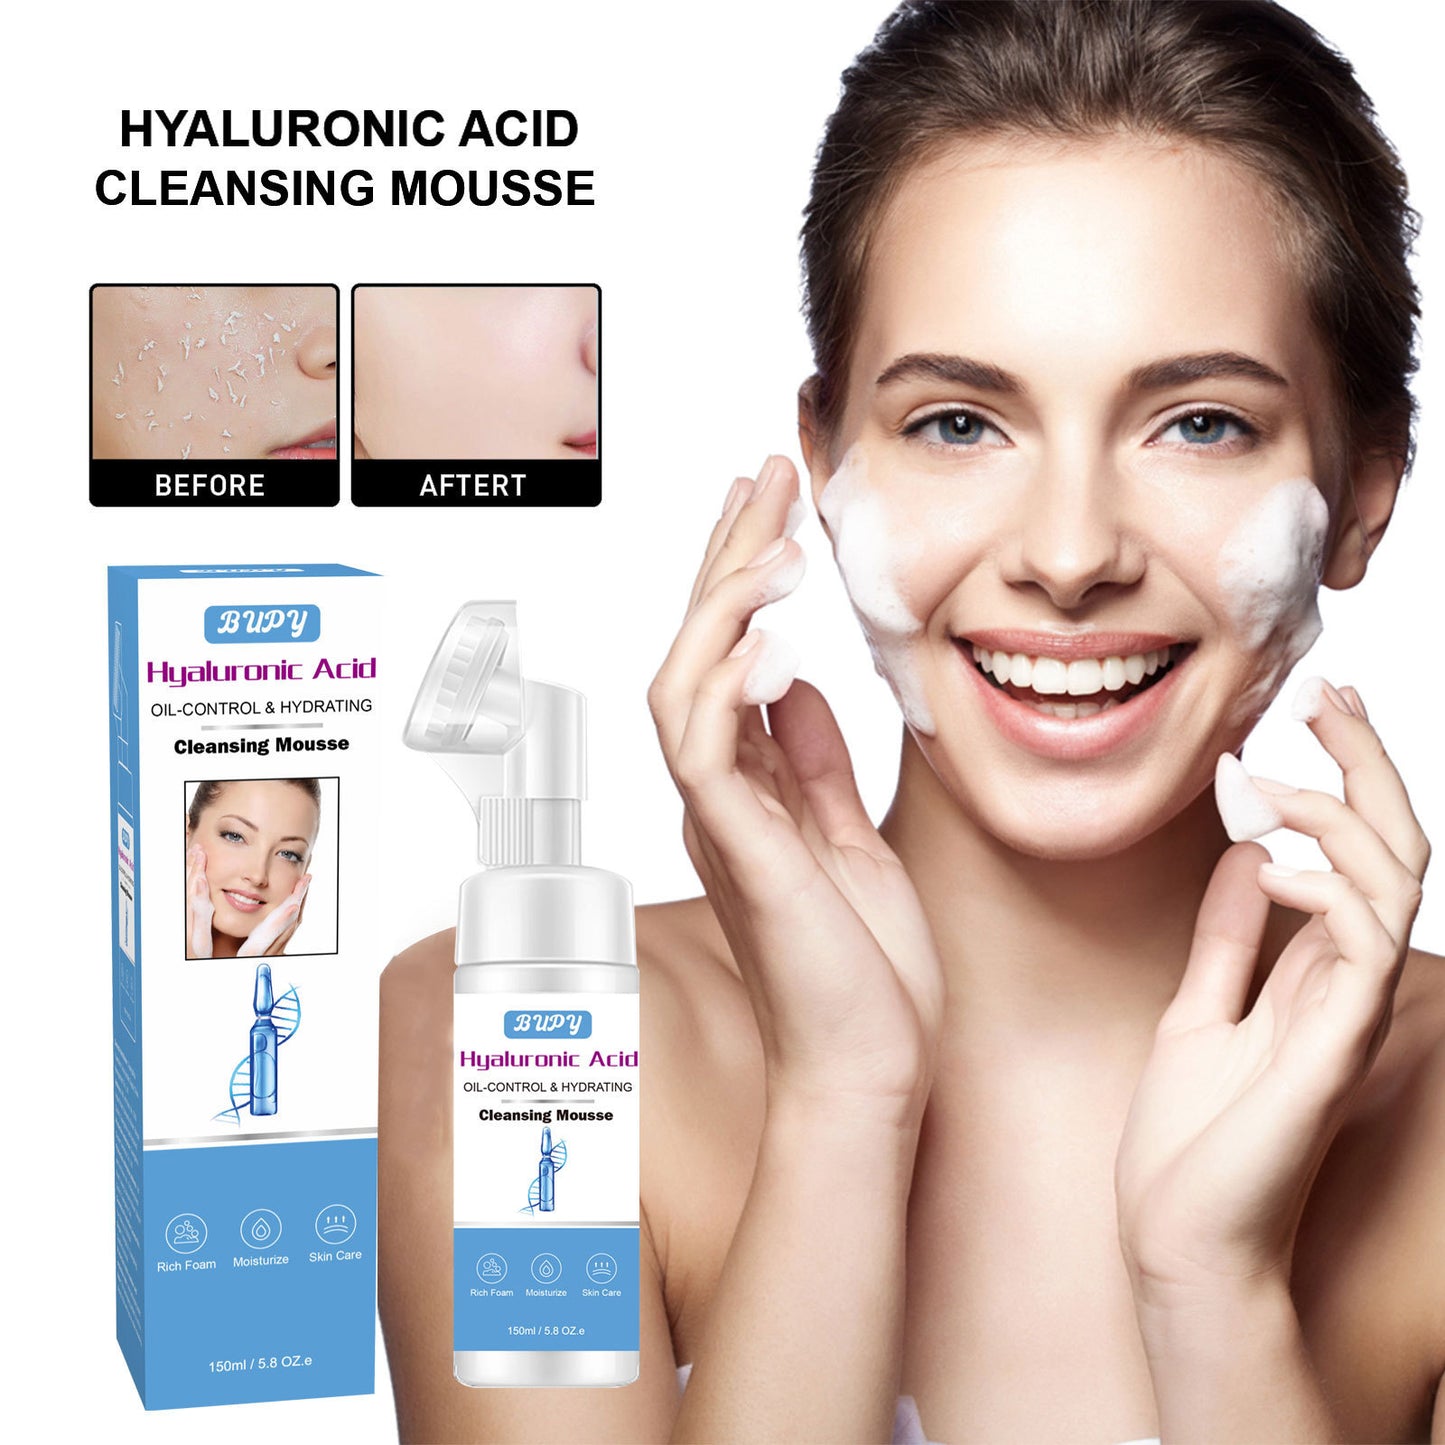 Wholesale Hyaluronic Acid Mousse Cleansing, Foam Facial Cleanser, Makeup Removal, Oil Control, Moisturizing 325